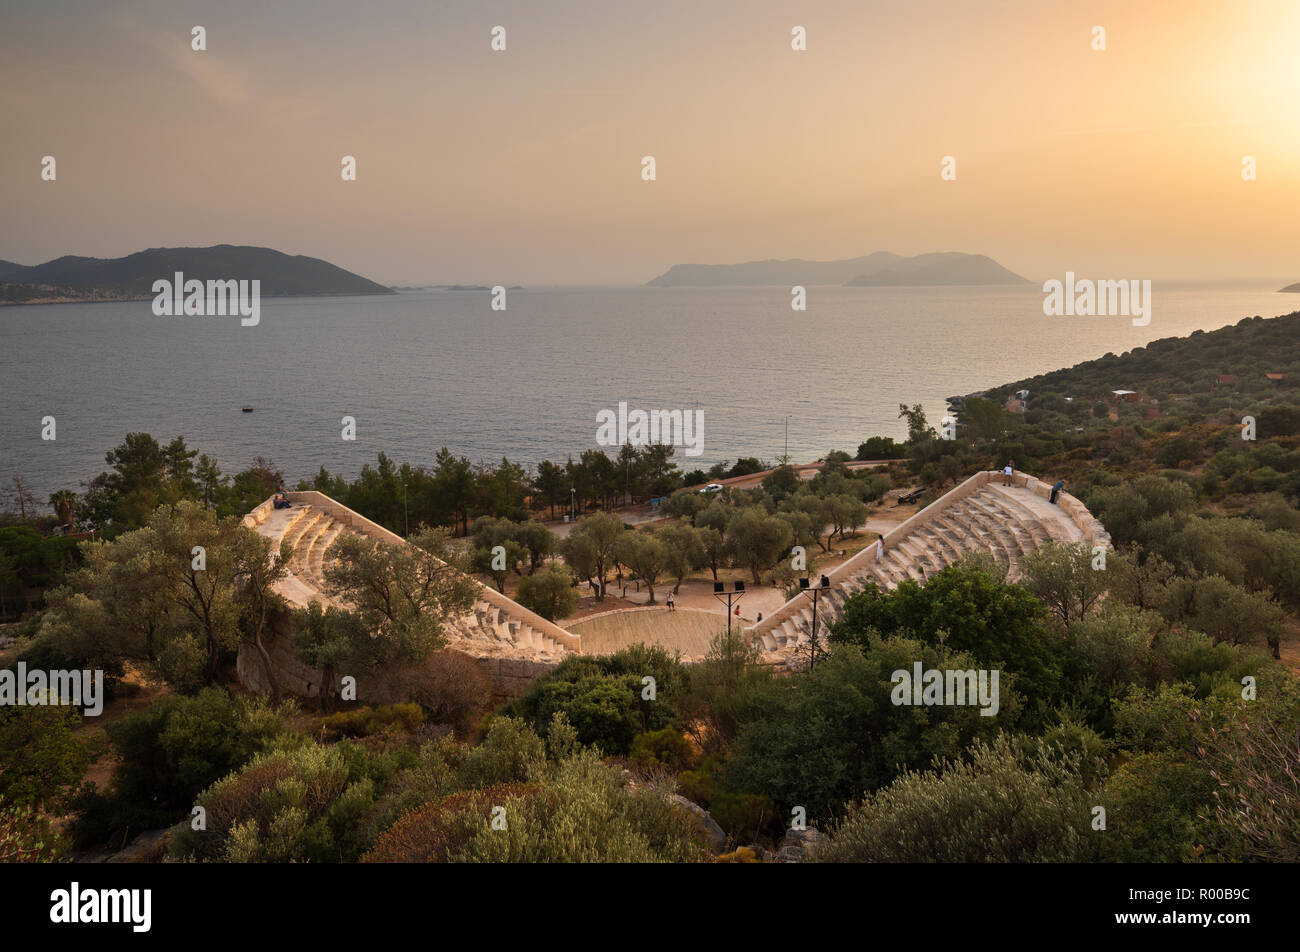 The Theatre of Antiphellos Ancient City in Kas district at sunset , Antalya, Turkey Stock Photo